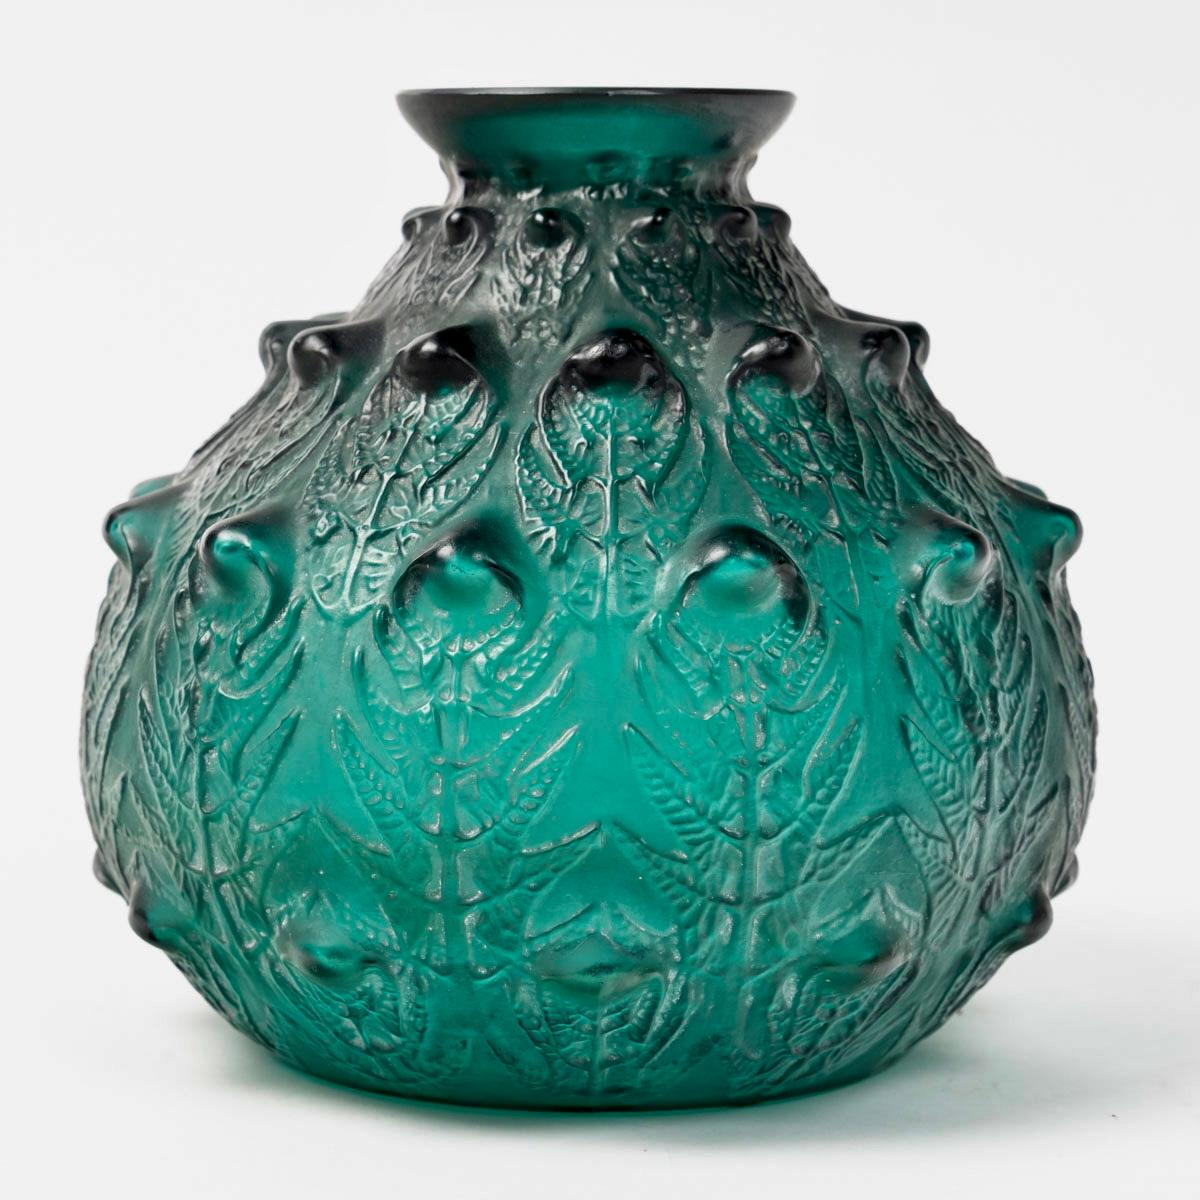 Art Deco 1912 René Lalique Vase Fougeres Teal Green Glass with White Patina Ferns